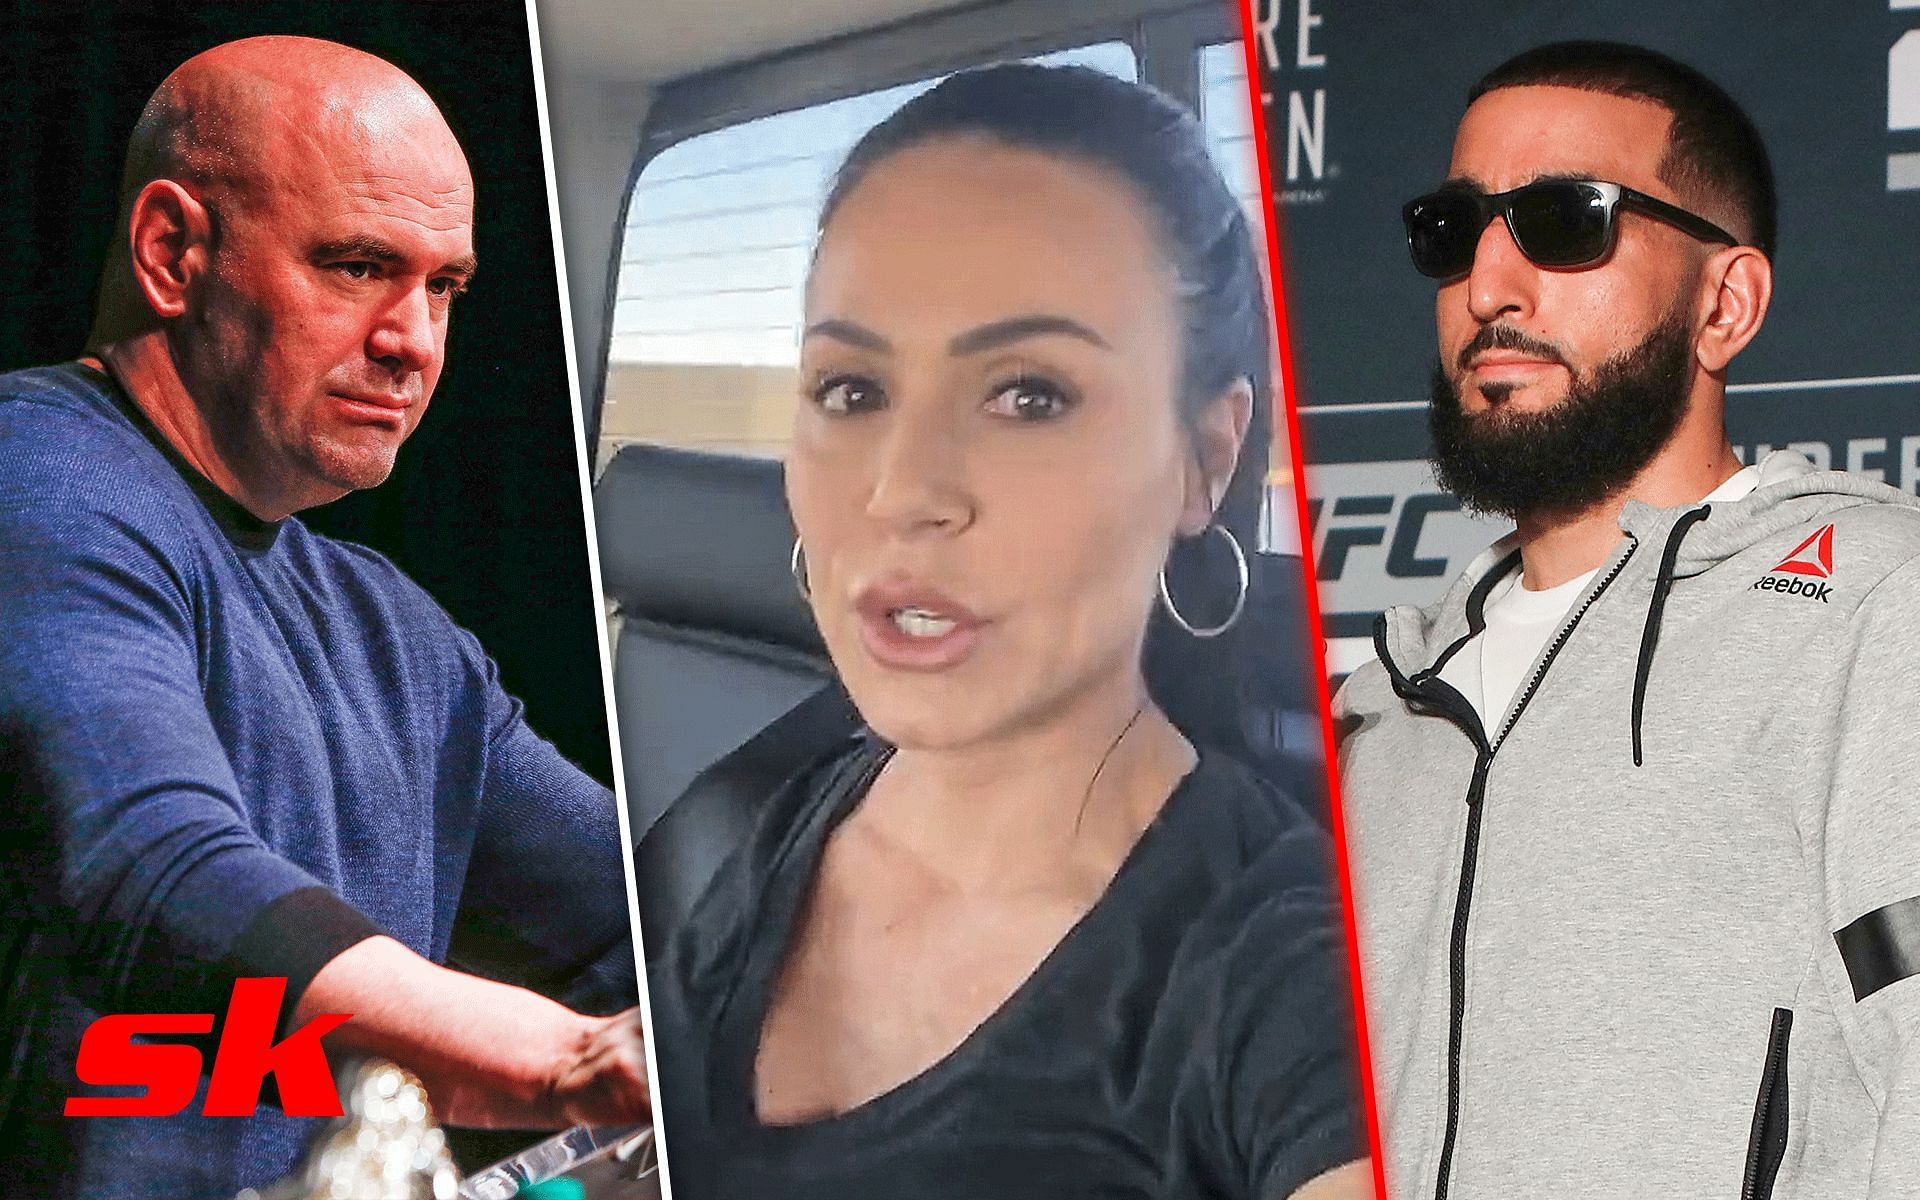 Dana White (Left), Kendra Lust (Middle), Belal Muhammad (Right) [Image courtesy: @kendralust on Instagram, Getty]